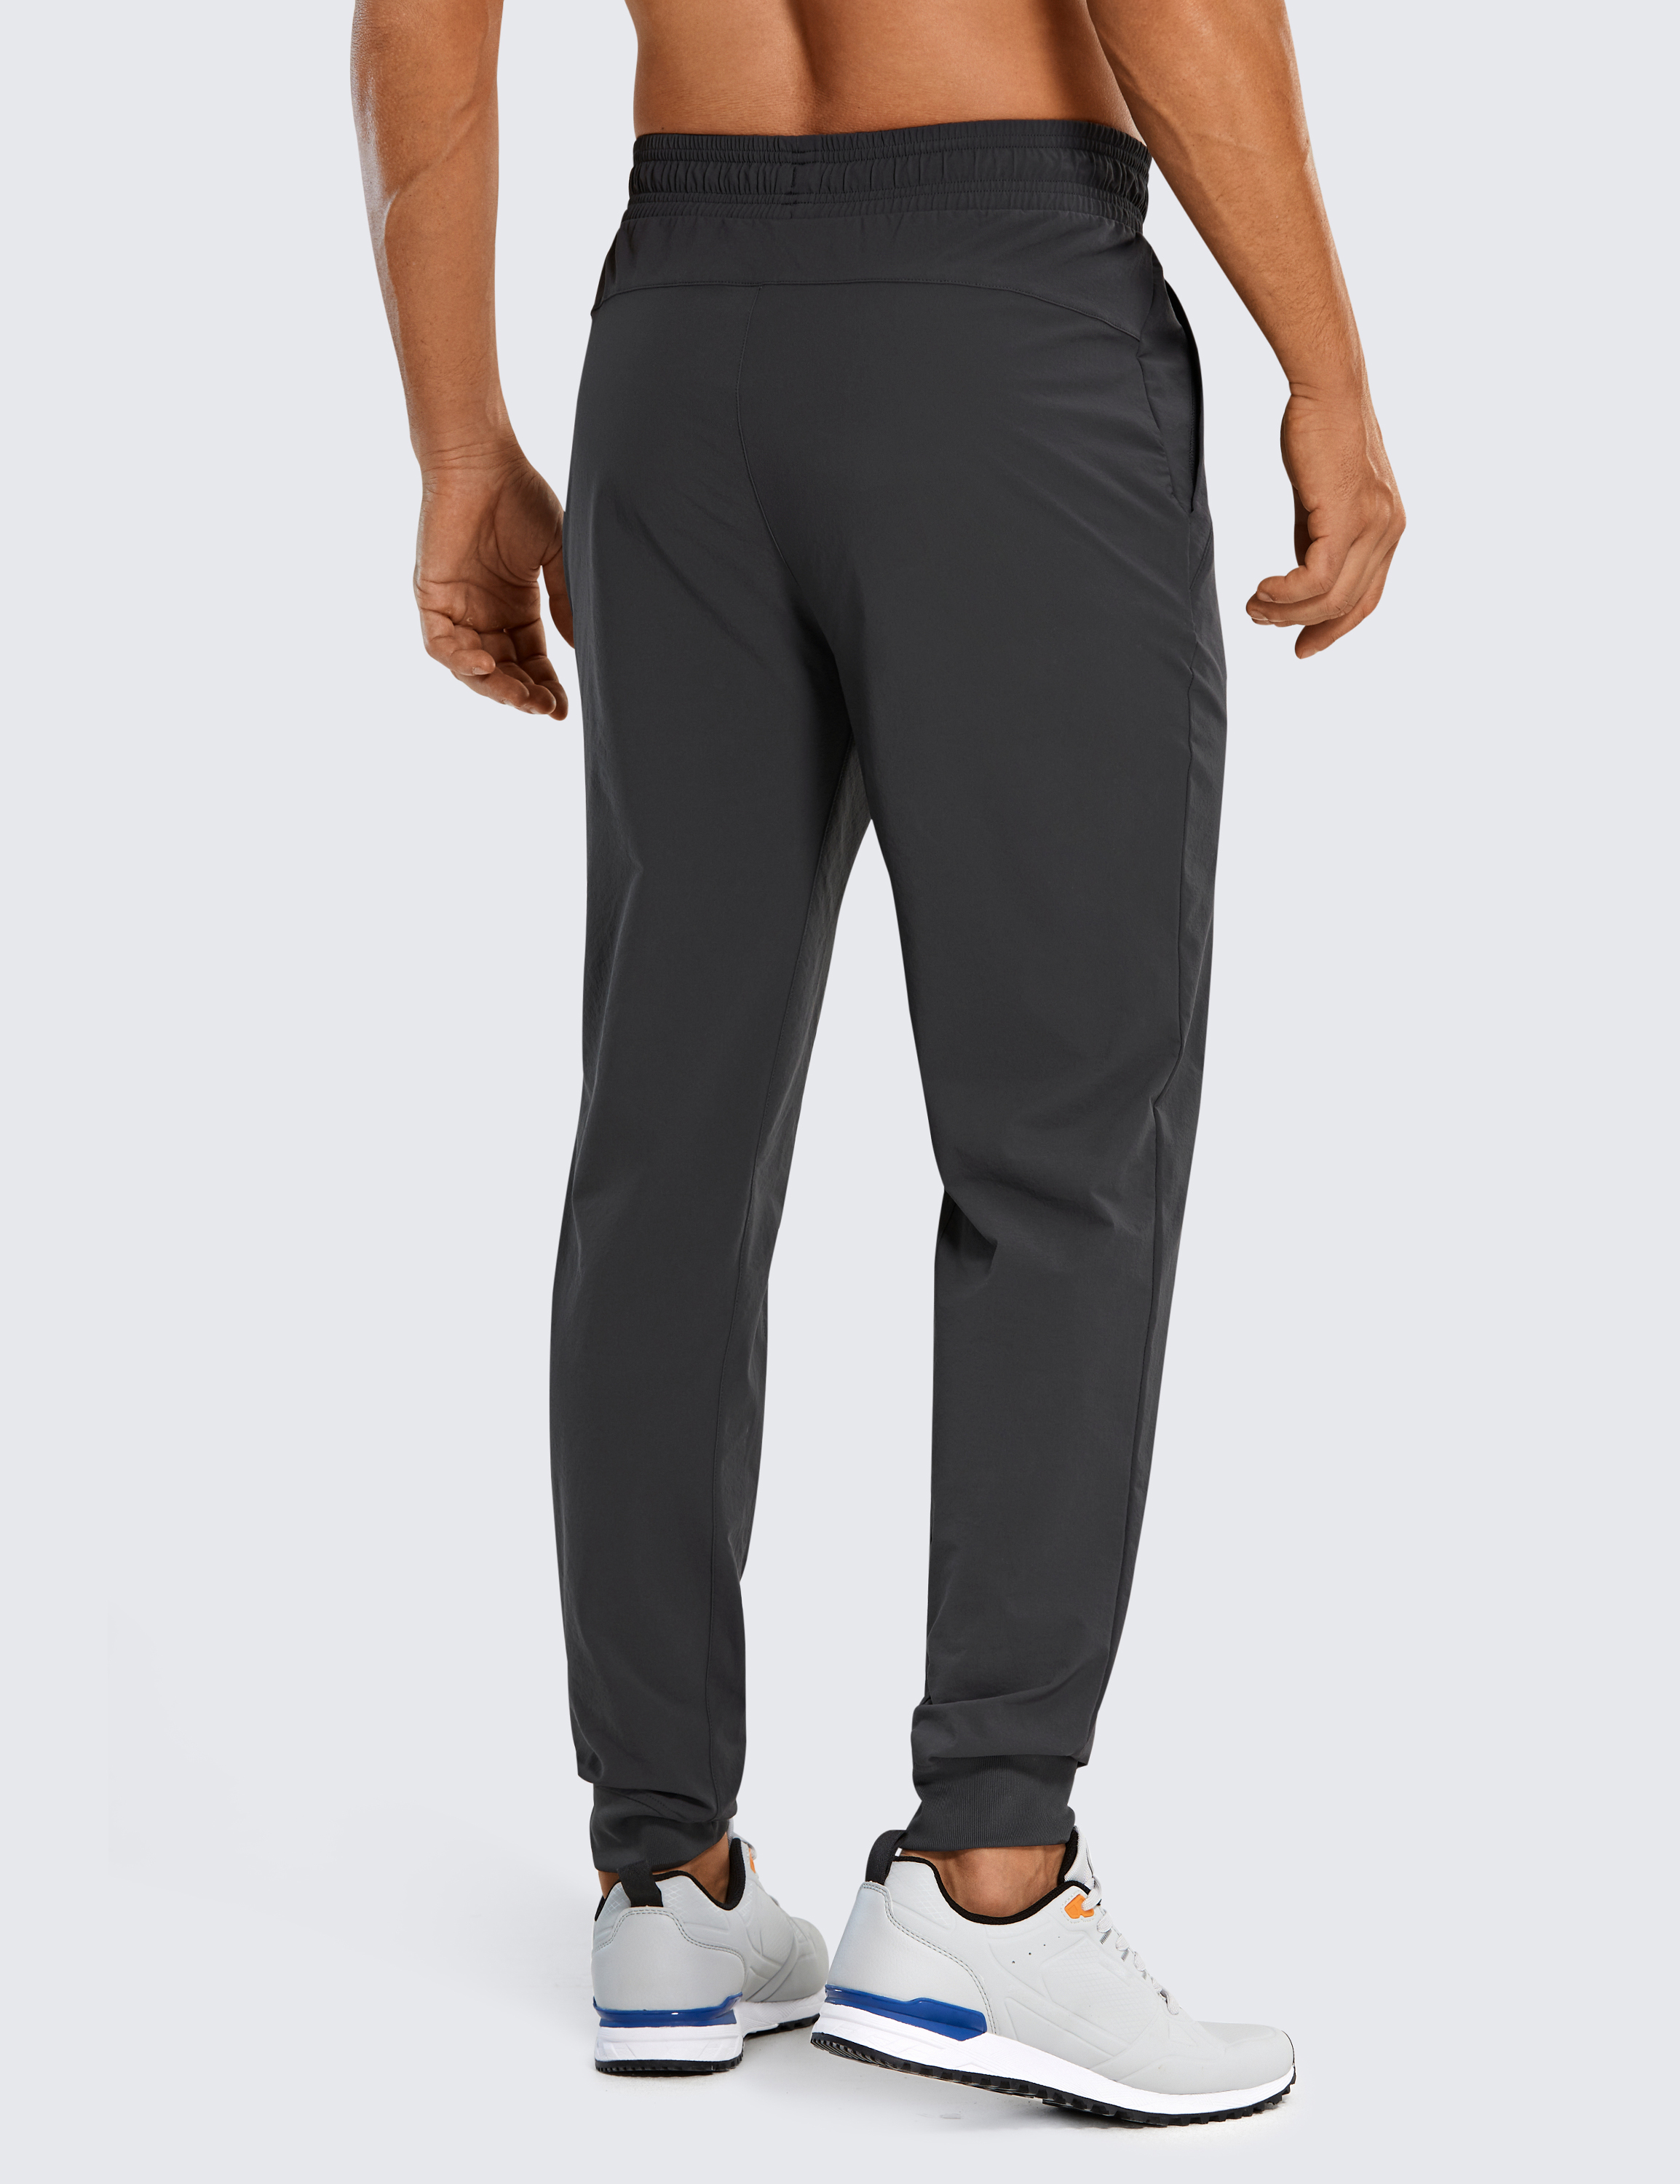 CRZ YOGA Lightweight Men's Golf Joggers 29 Inches Track Pants with Zip  Pockets